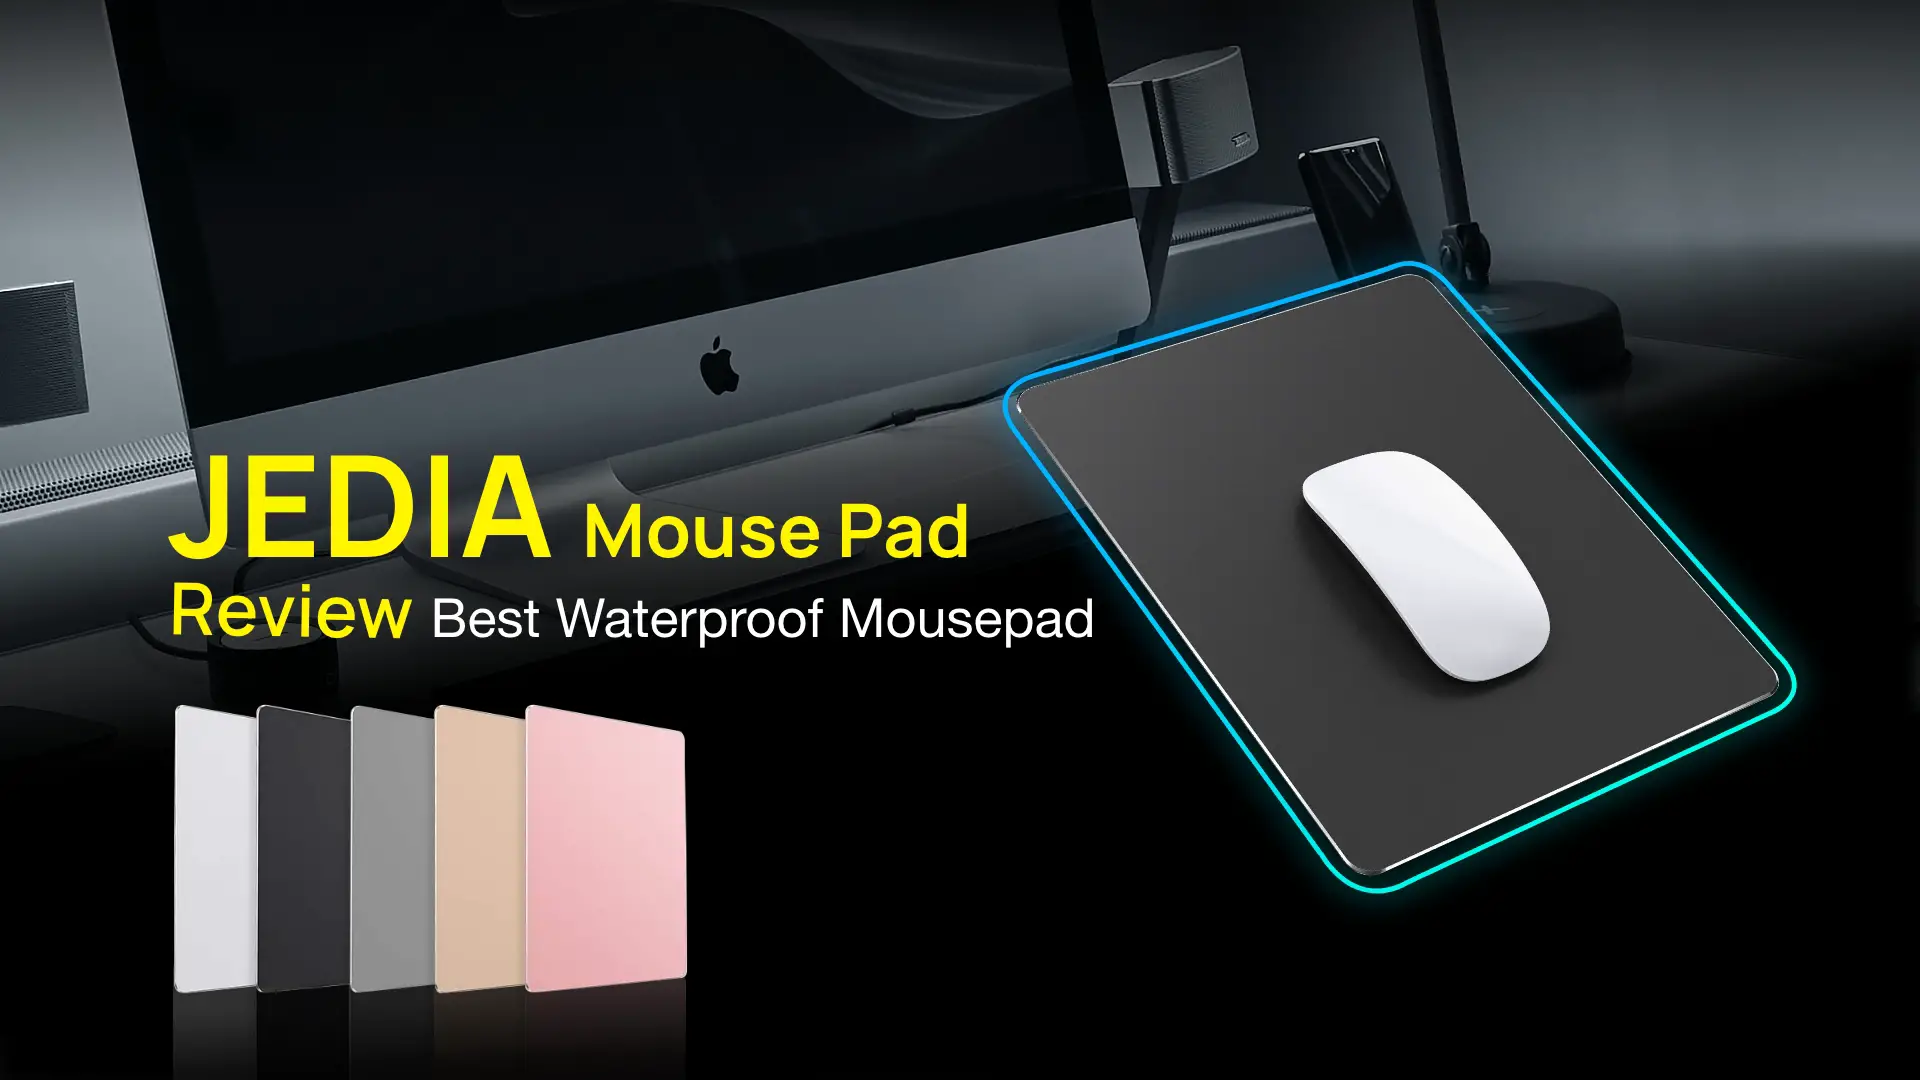 JEDIA Mouse Pad review – Best Waterproof Mousepad